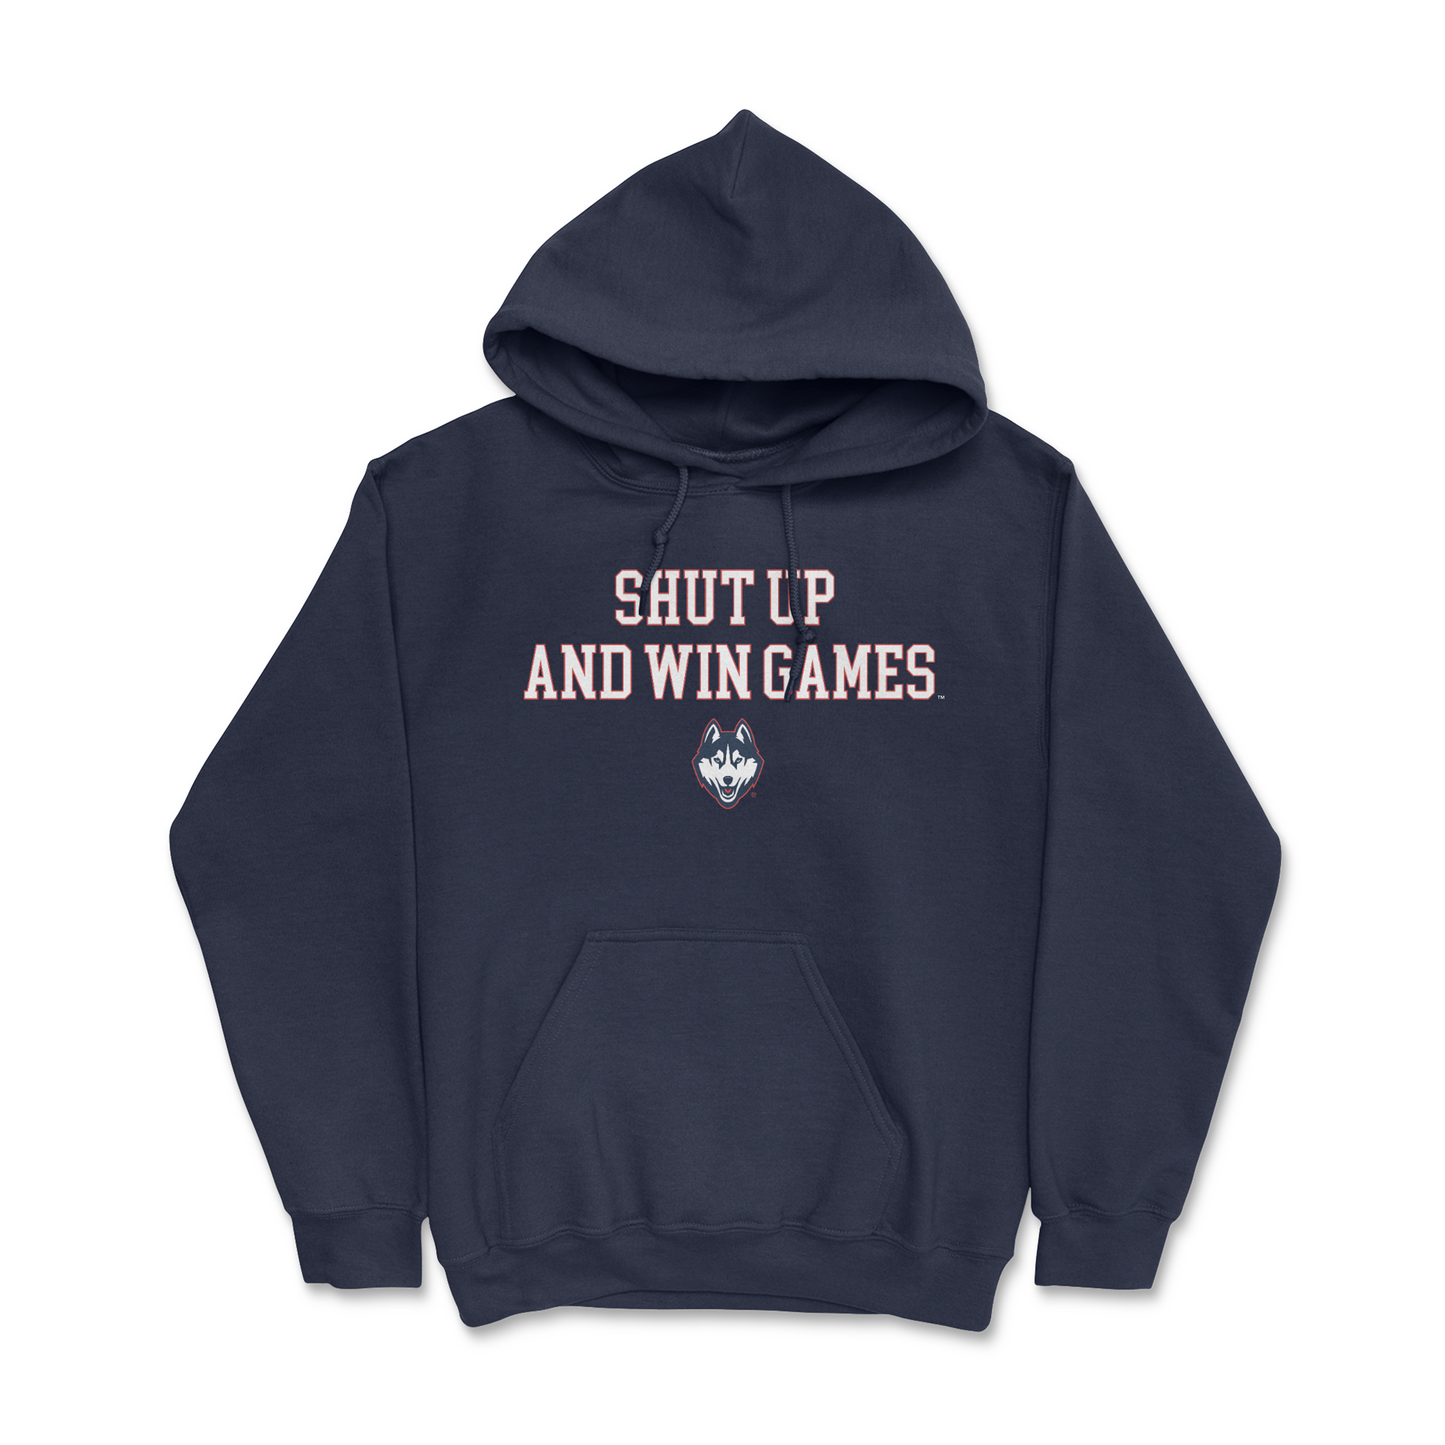 LIMITED RELEASE: UConn Shut Up and Win Games Hoodie in Navy